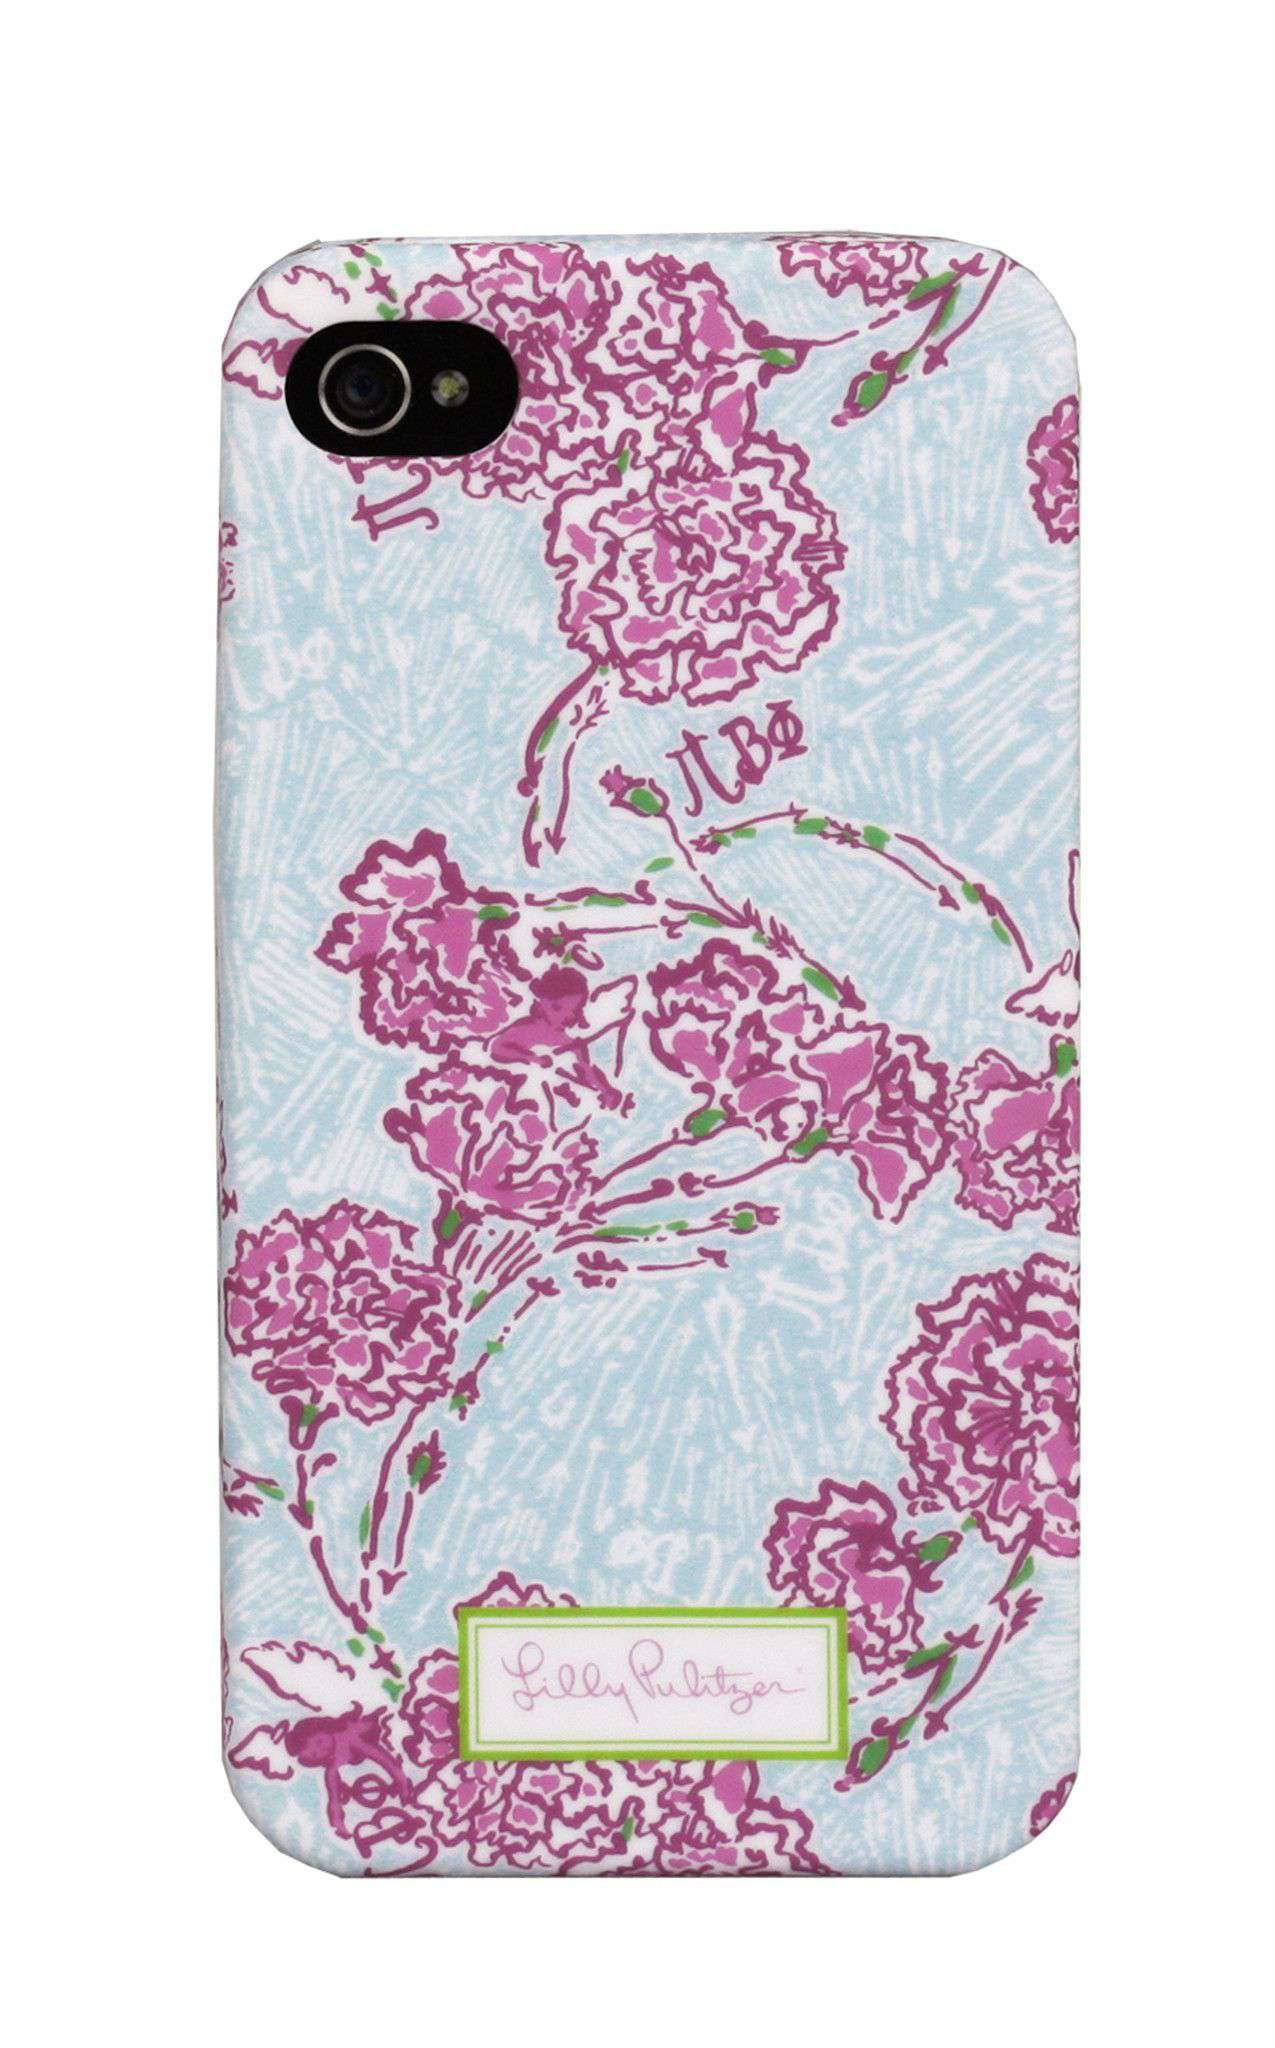 Pi Beta Phi iPhone 4/4s Cover by Lilly Pulitzer - Country Club Prep